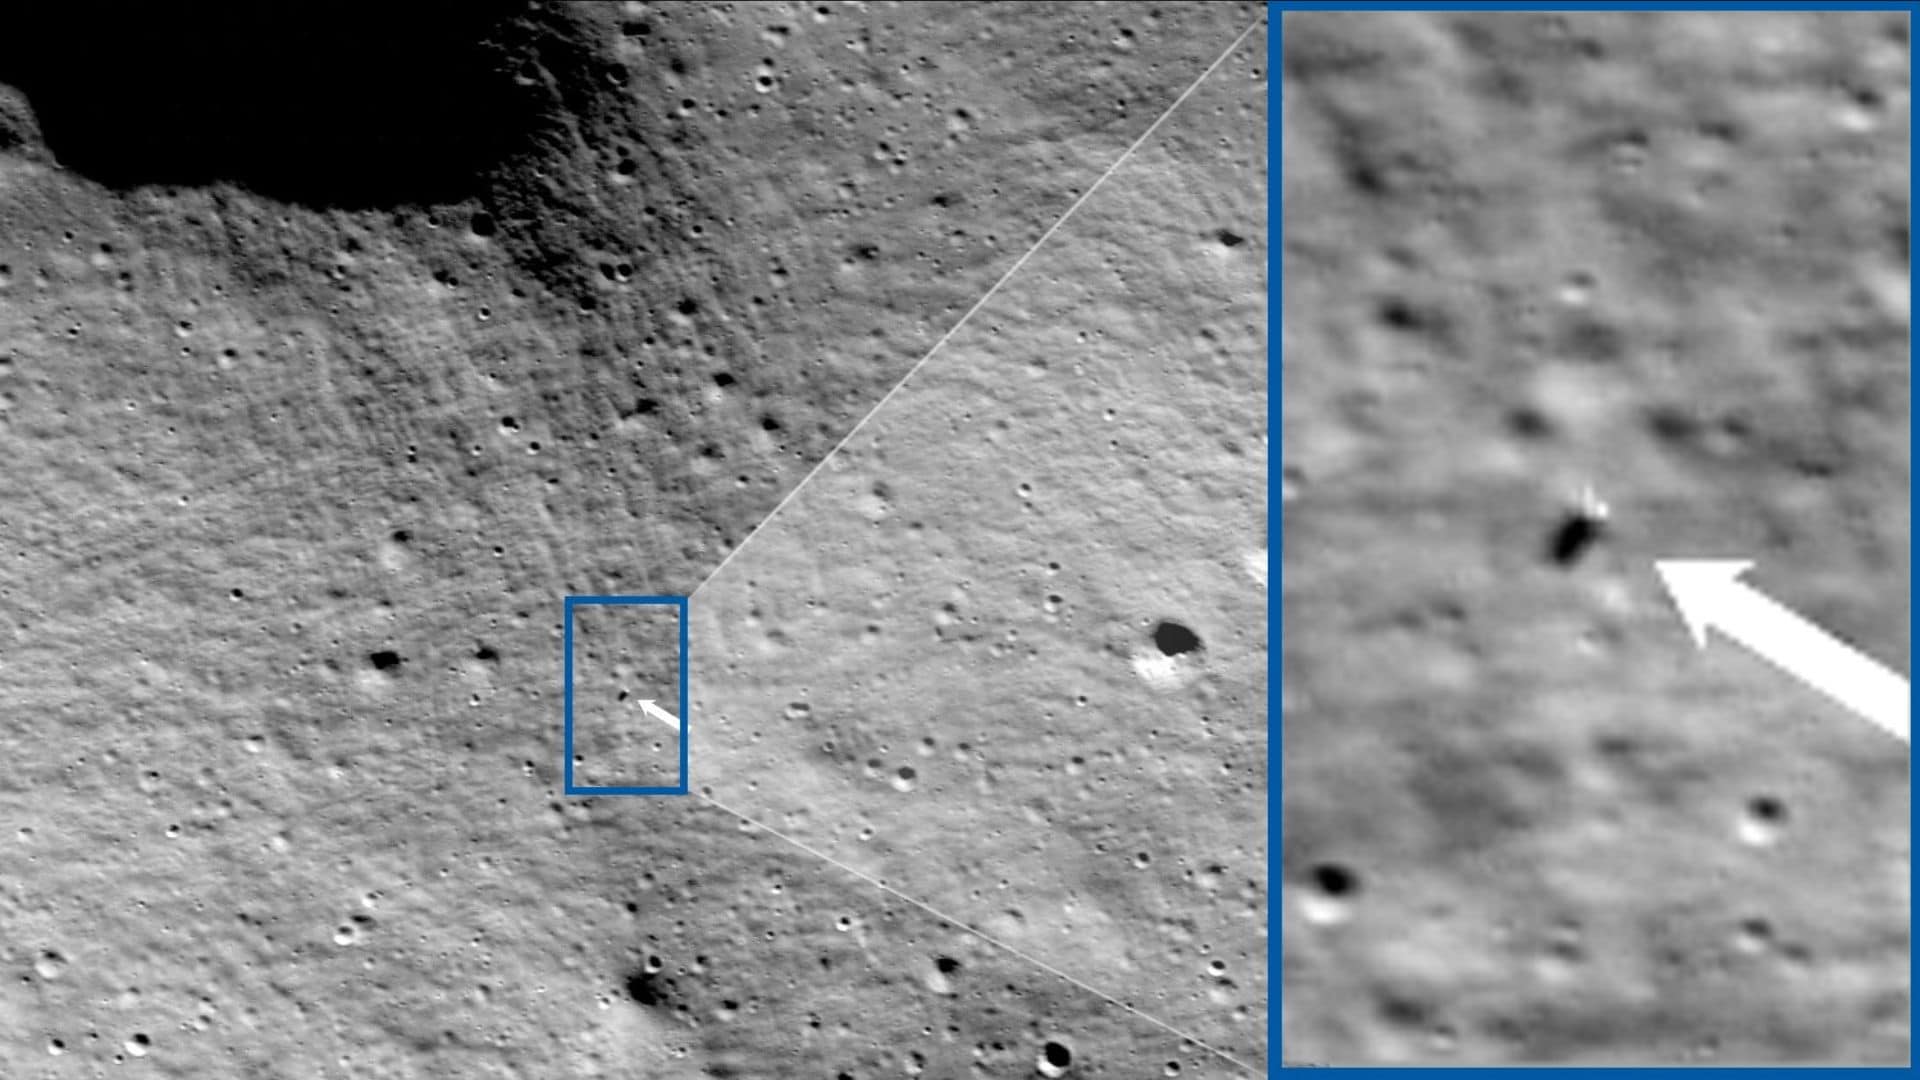 NASA’s Lunar Reconnaissance Orbiter (LRO) spacecraft spotted the Odysseus lander on the lunar surface on February 24, 2024